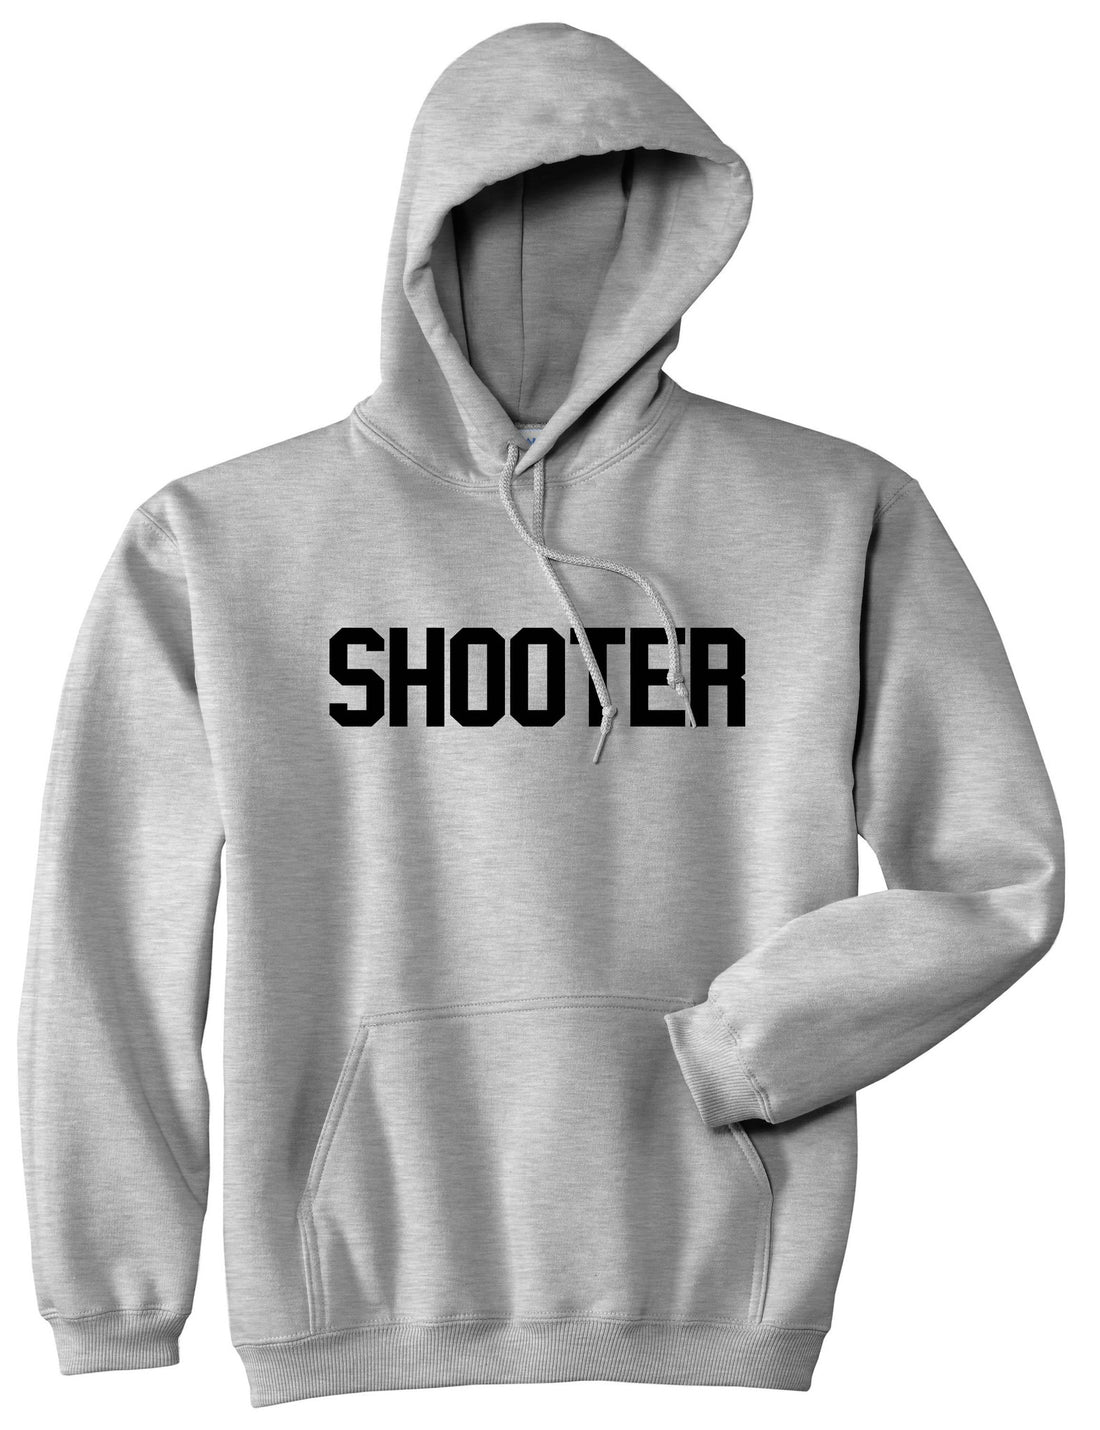 Shooter Pullover Hoodie Hoody by Kings Of NY